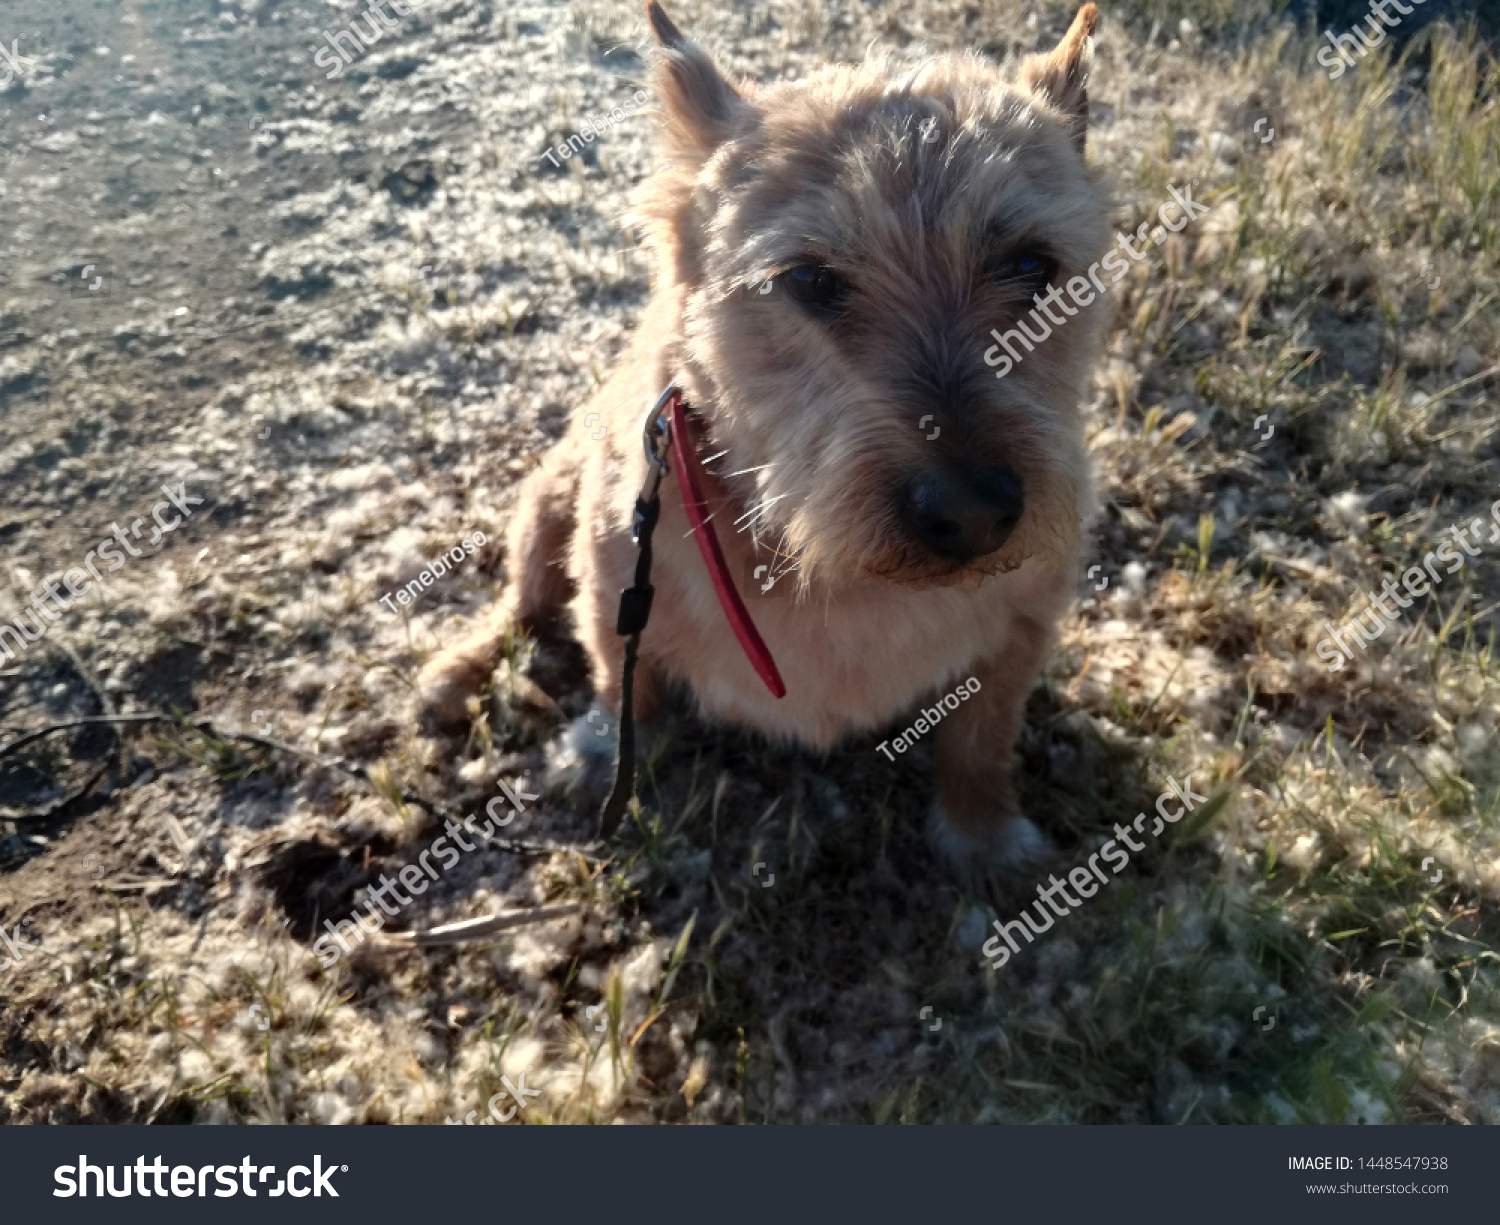 allergy in animals, antipathy, australian terrier, brightness and contrast, brown, canine, closeup, countryside, dog, domestic, domestic animal, environment, grain, grass, hay fever, hyper sensitivity #1448547938